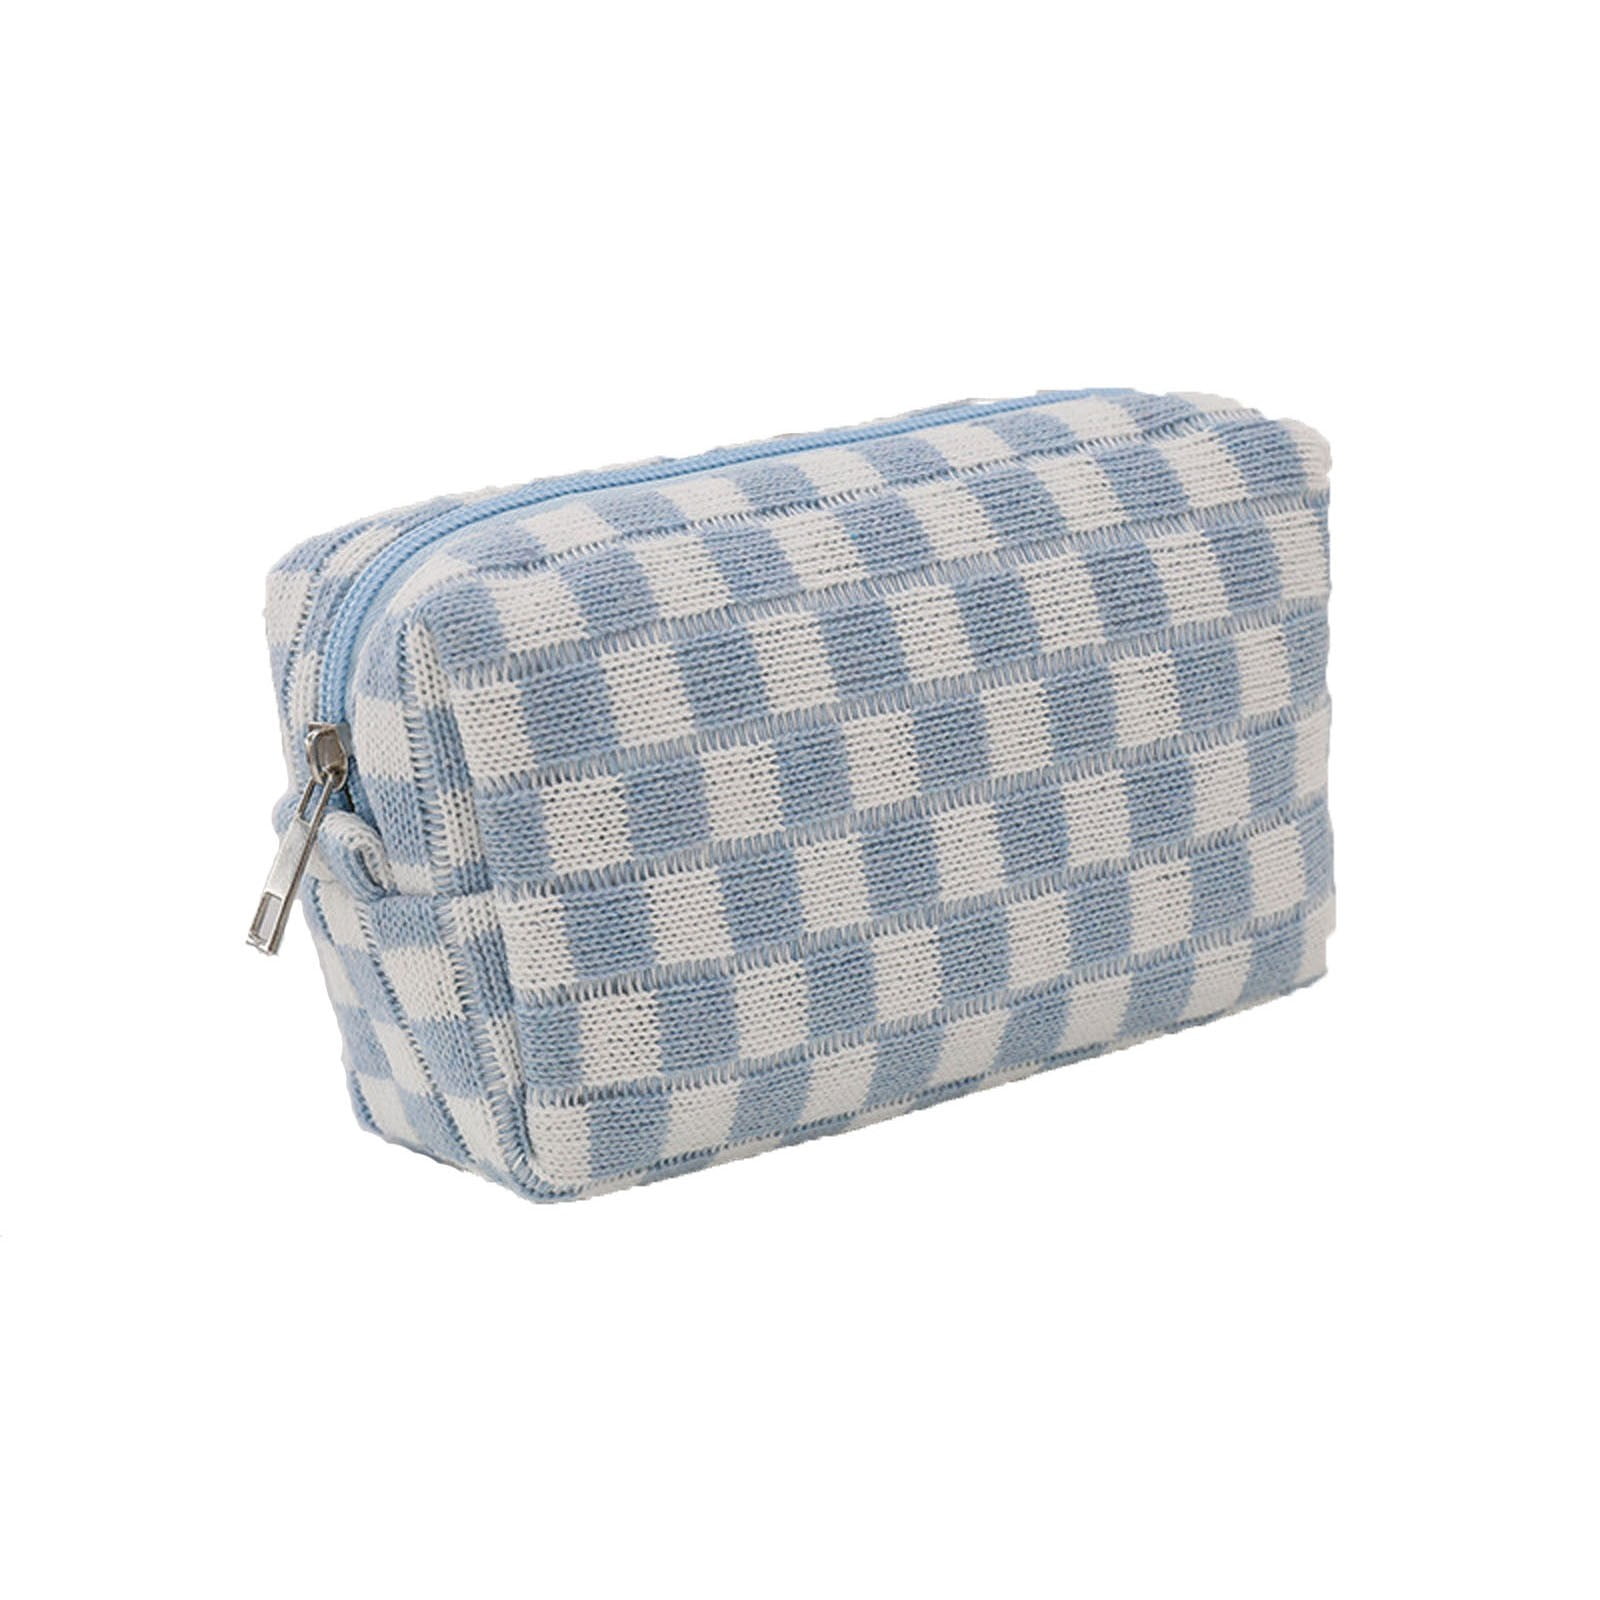  WIRIBEY Checkered Makeup Bag, Portable Bag with Adjustable  Partition, Cosmetic Bags for Women Toiletry Travel Organizer Bags for  Christmas Birthday Gifts : Beauty & Personal Care